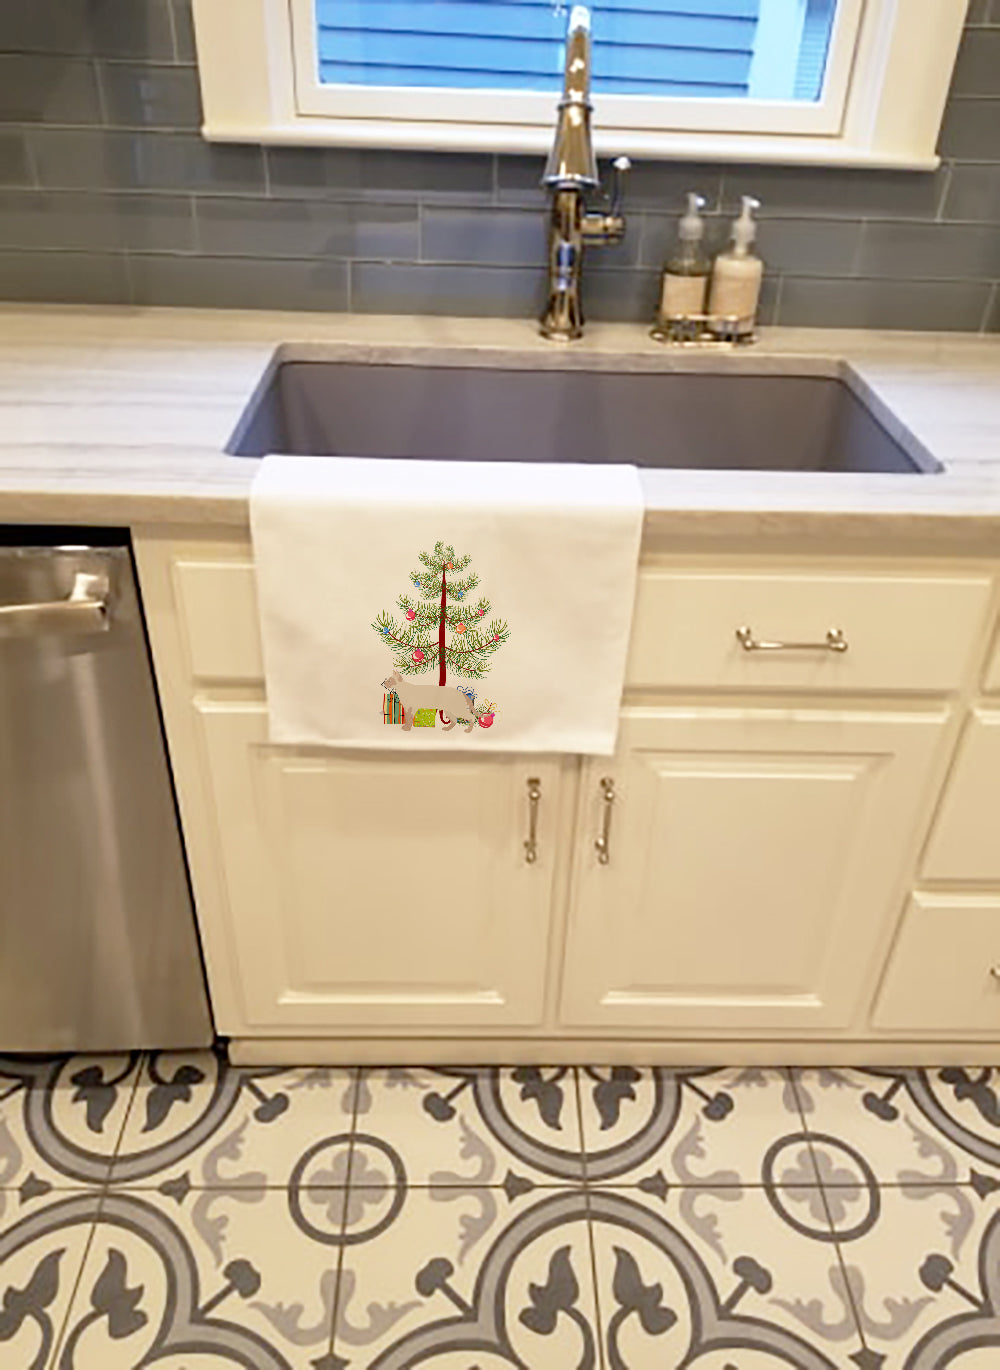 Buy this Tonkinese #2 Cat Merry Christmas White Kitchen Towel Set of 2